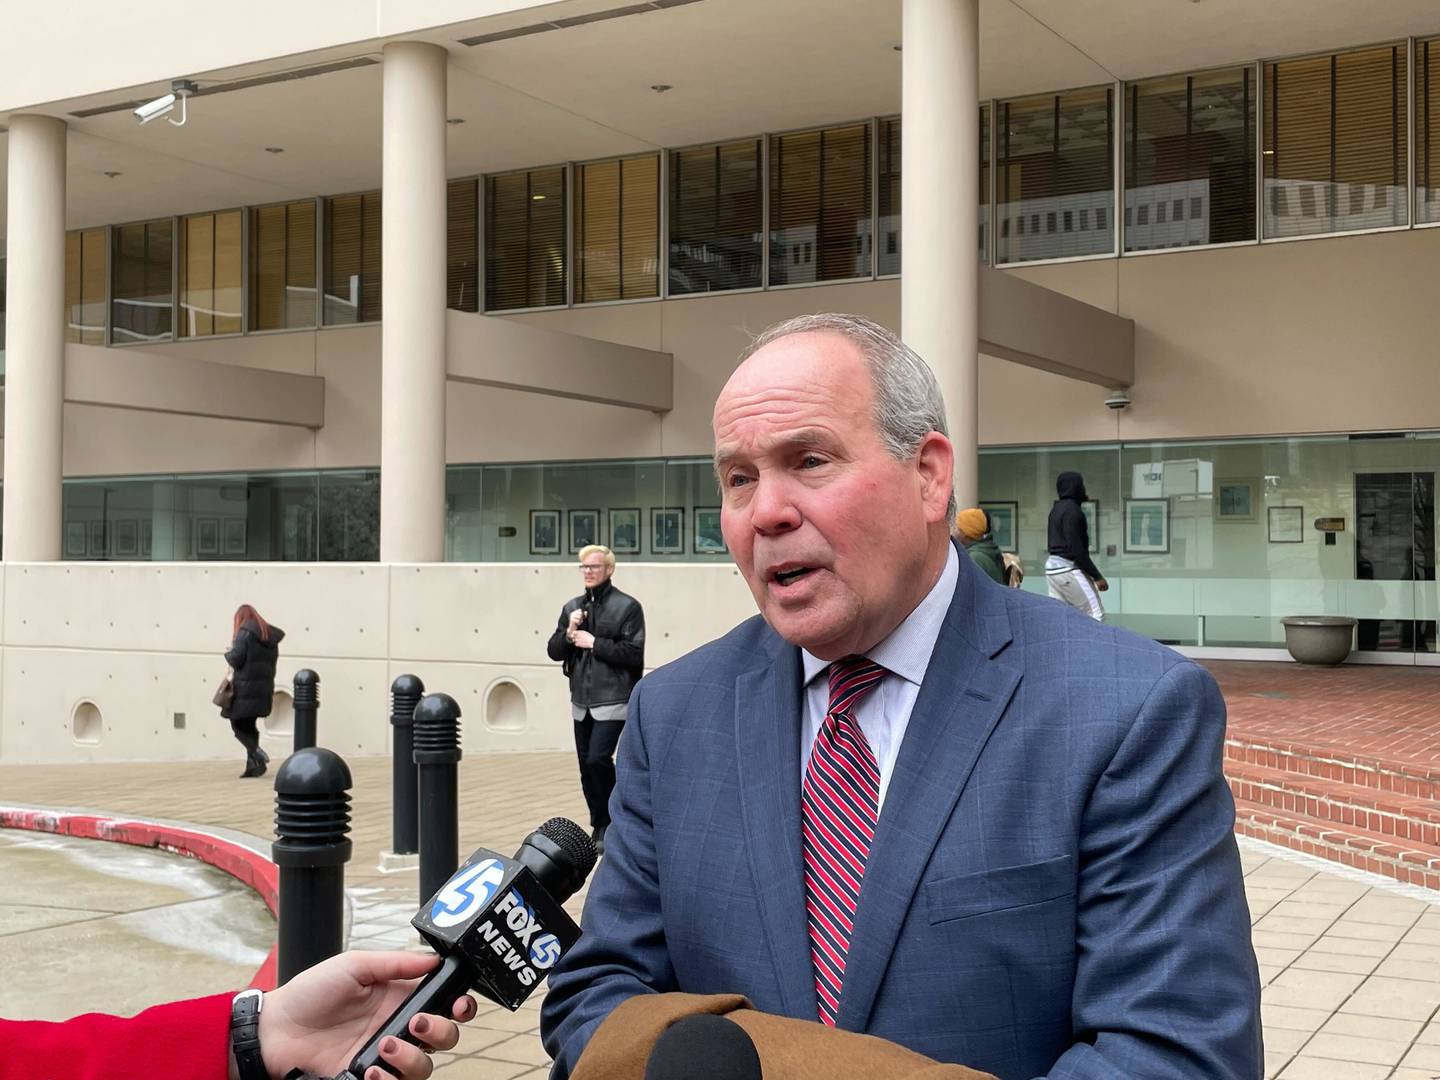 Attorney Joseph Murtha speaks to reporters outside U.S. District Court in Baltimore on Monday, March 13, 2023. He represents Roy McGrath, an ex-chief of staff to former Gov. Larry Hogan, who did not show up for his scheduled trial.